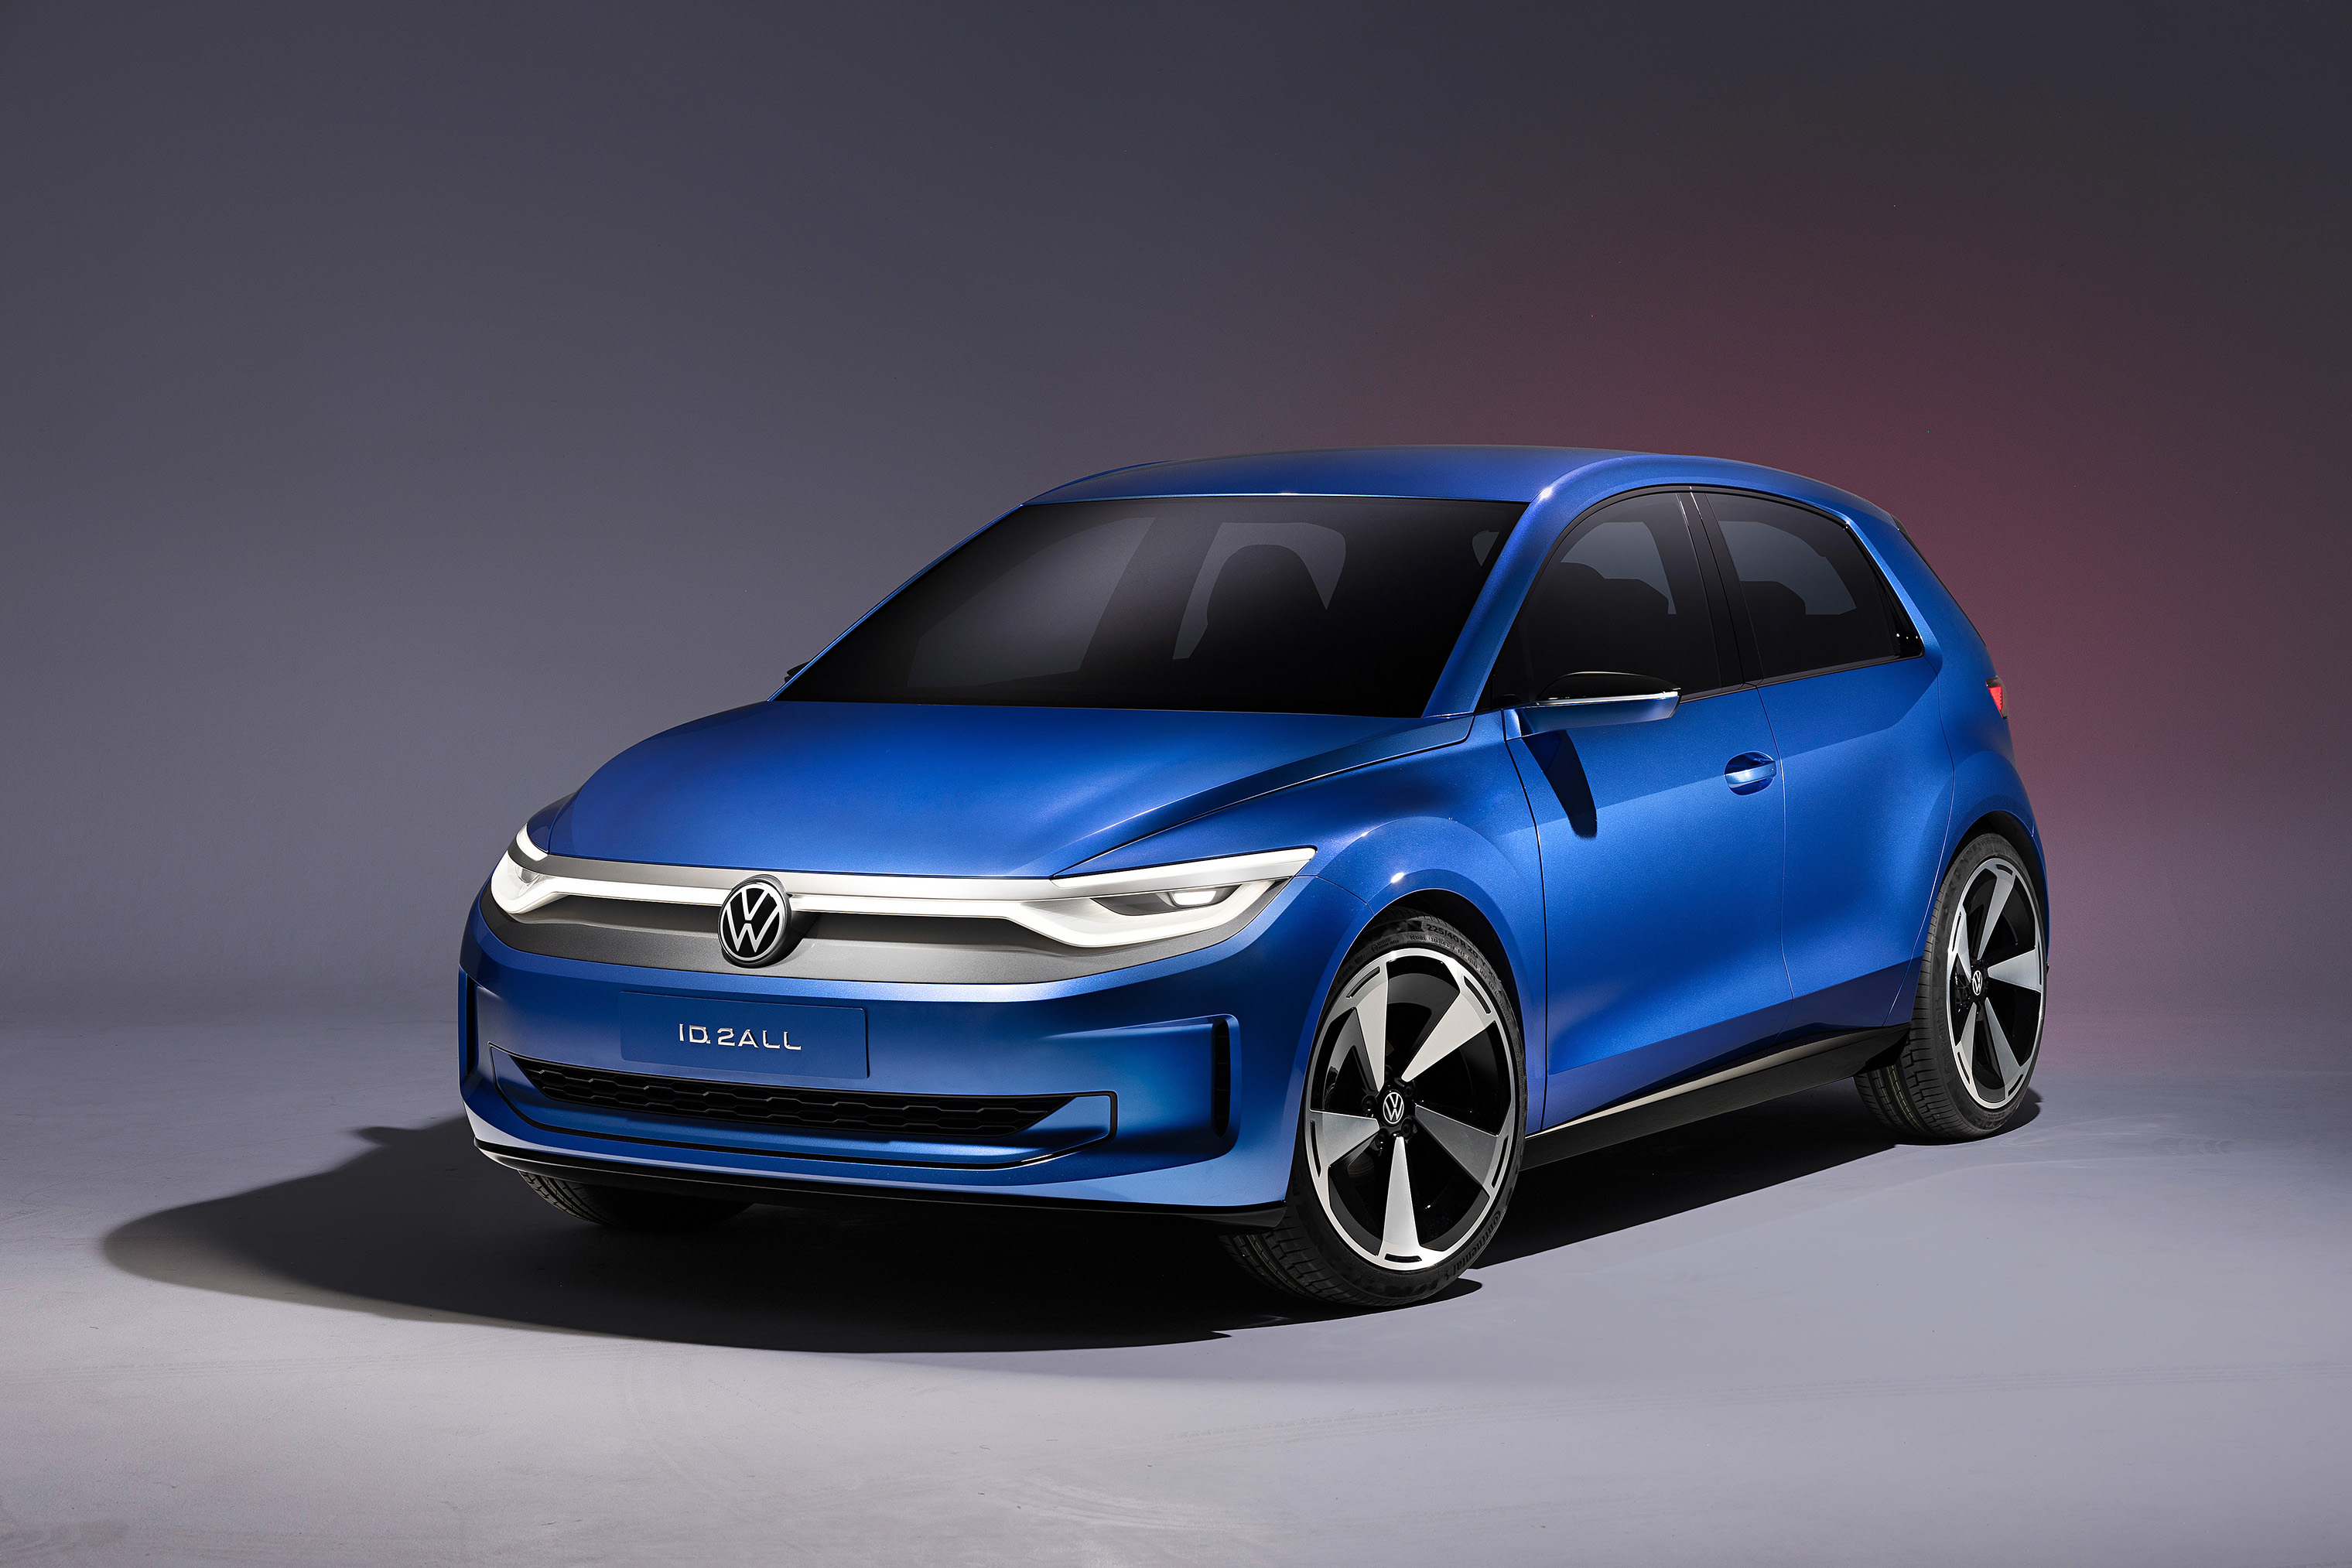 Volkswagen ID. 2all EV Unveiled as it Competes Where Tesla Has